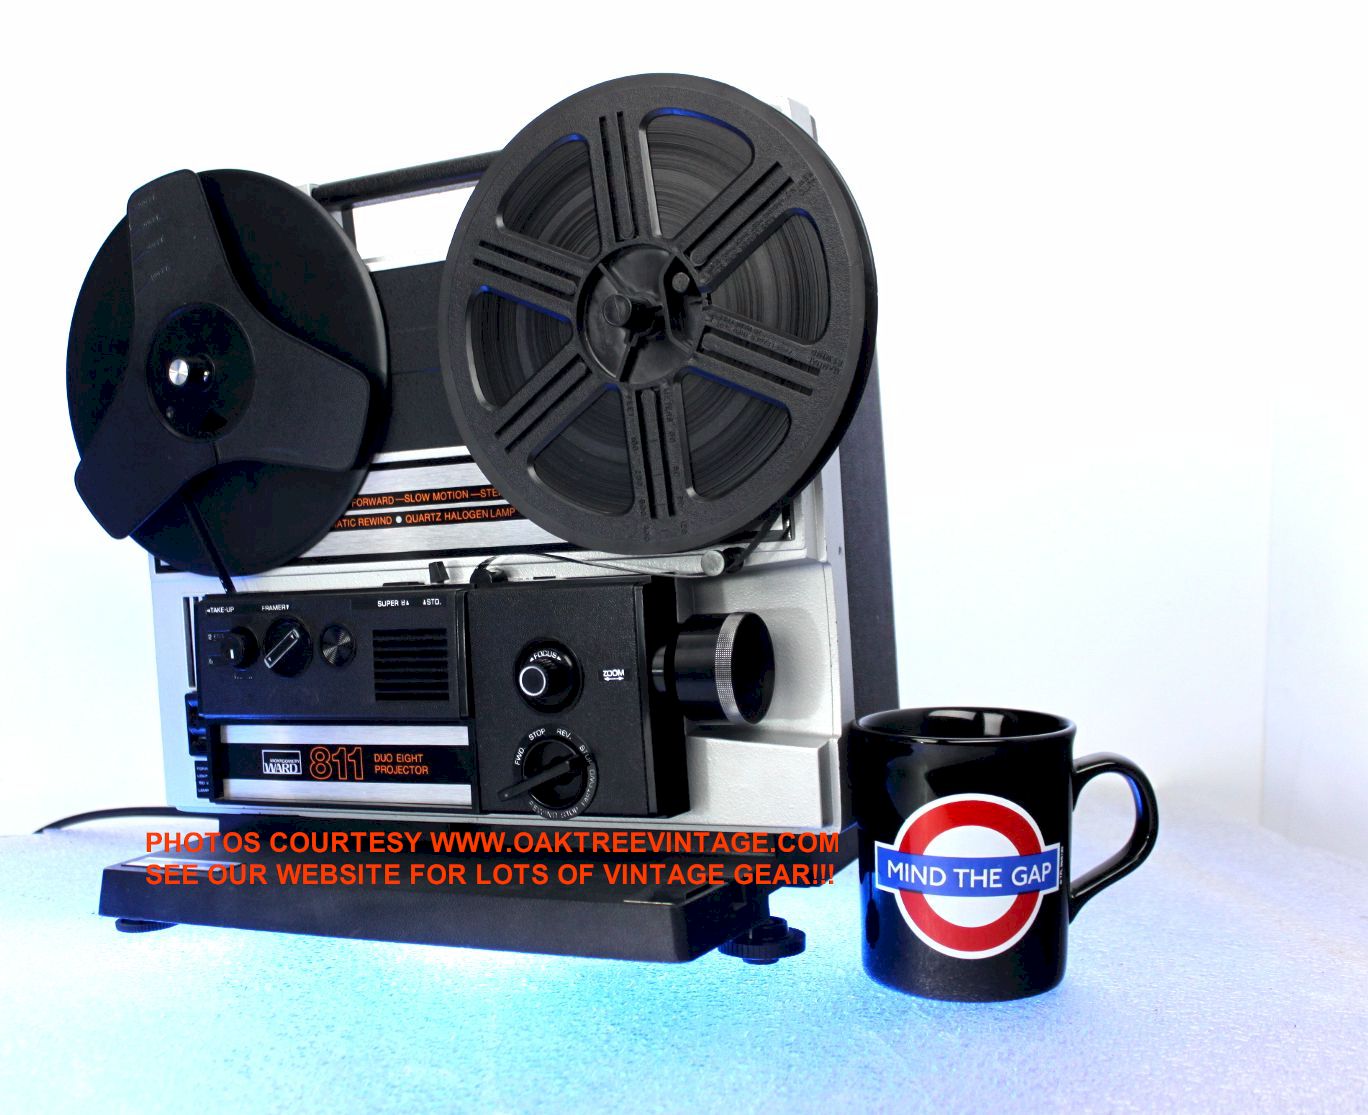 8mm & Super-8 Film projectors reel to reel film / / motion-picture / movie  projectors Refurbished / FULLY SERVICED for sale! With 90 day Warranty!